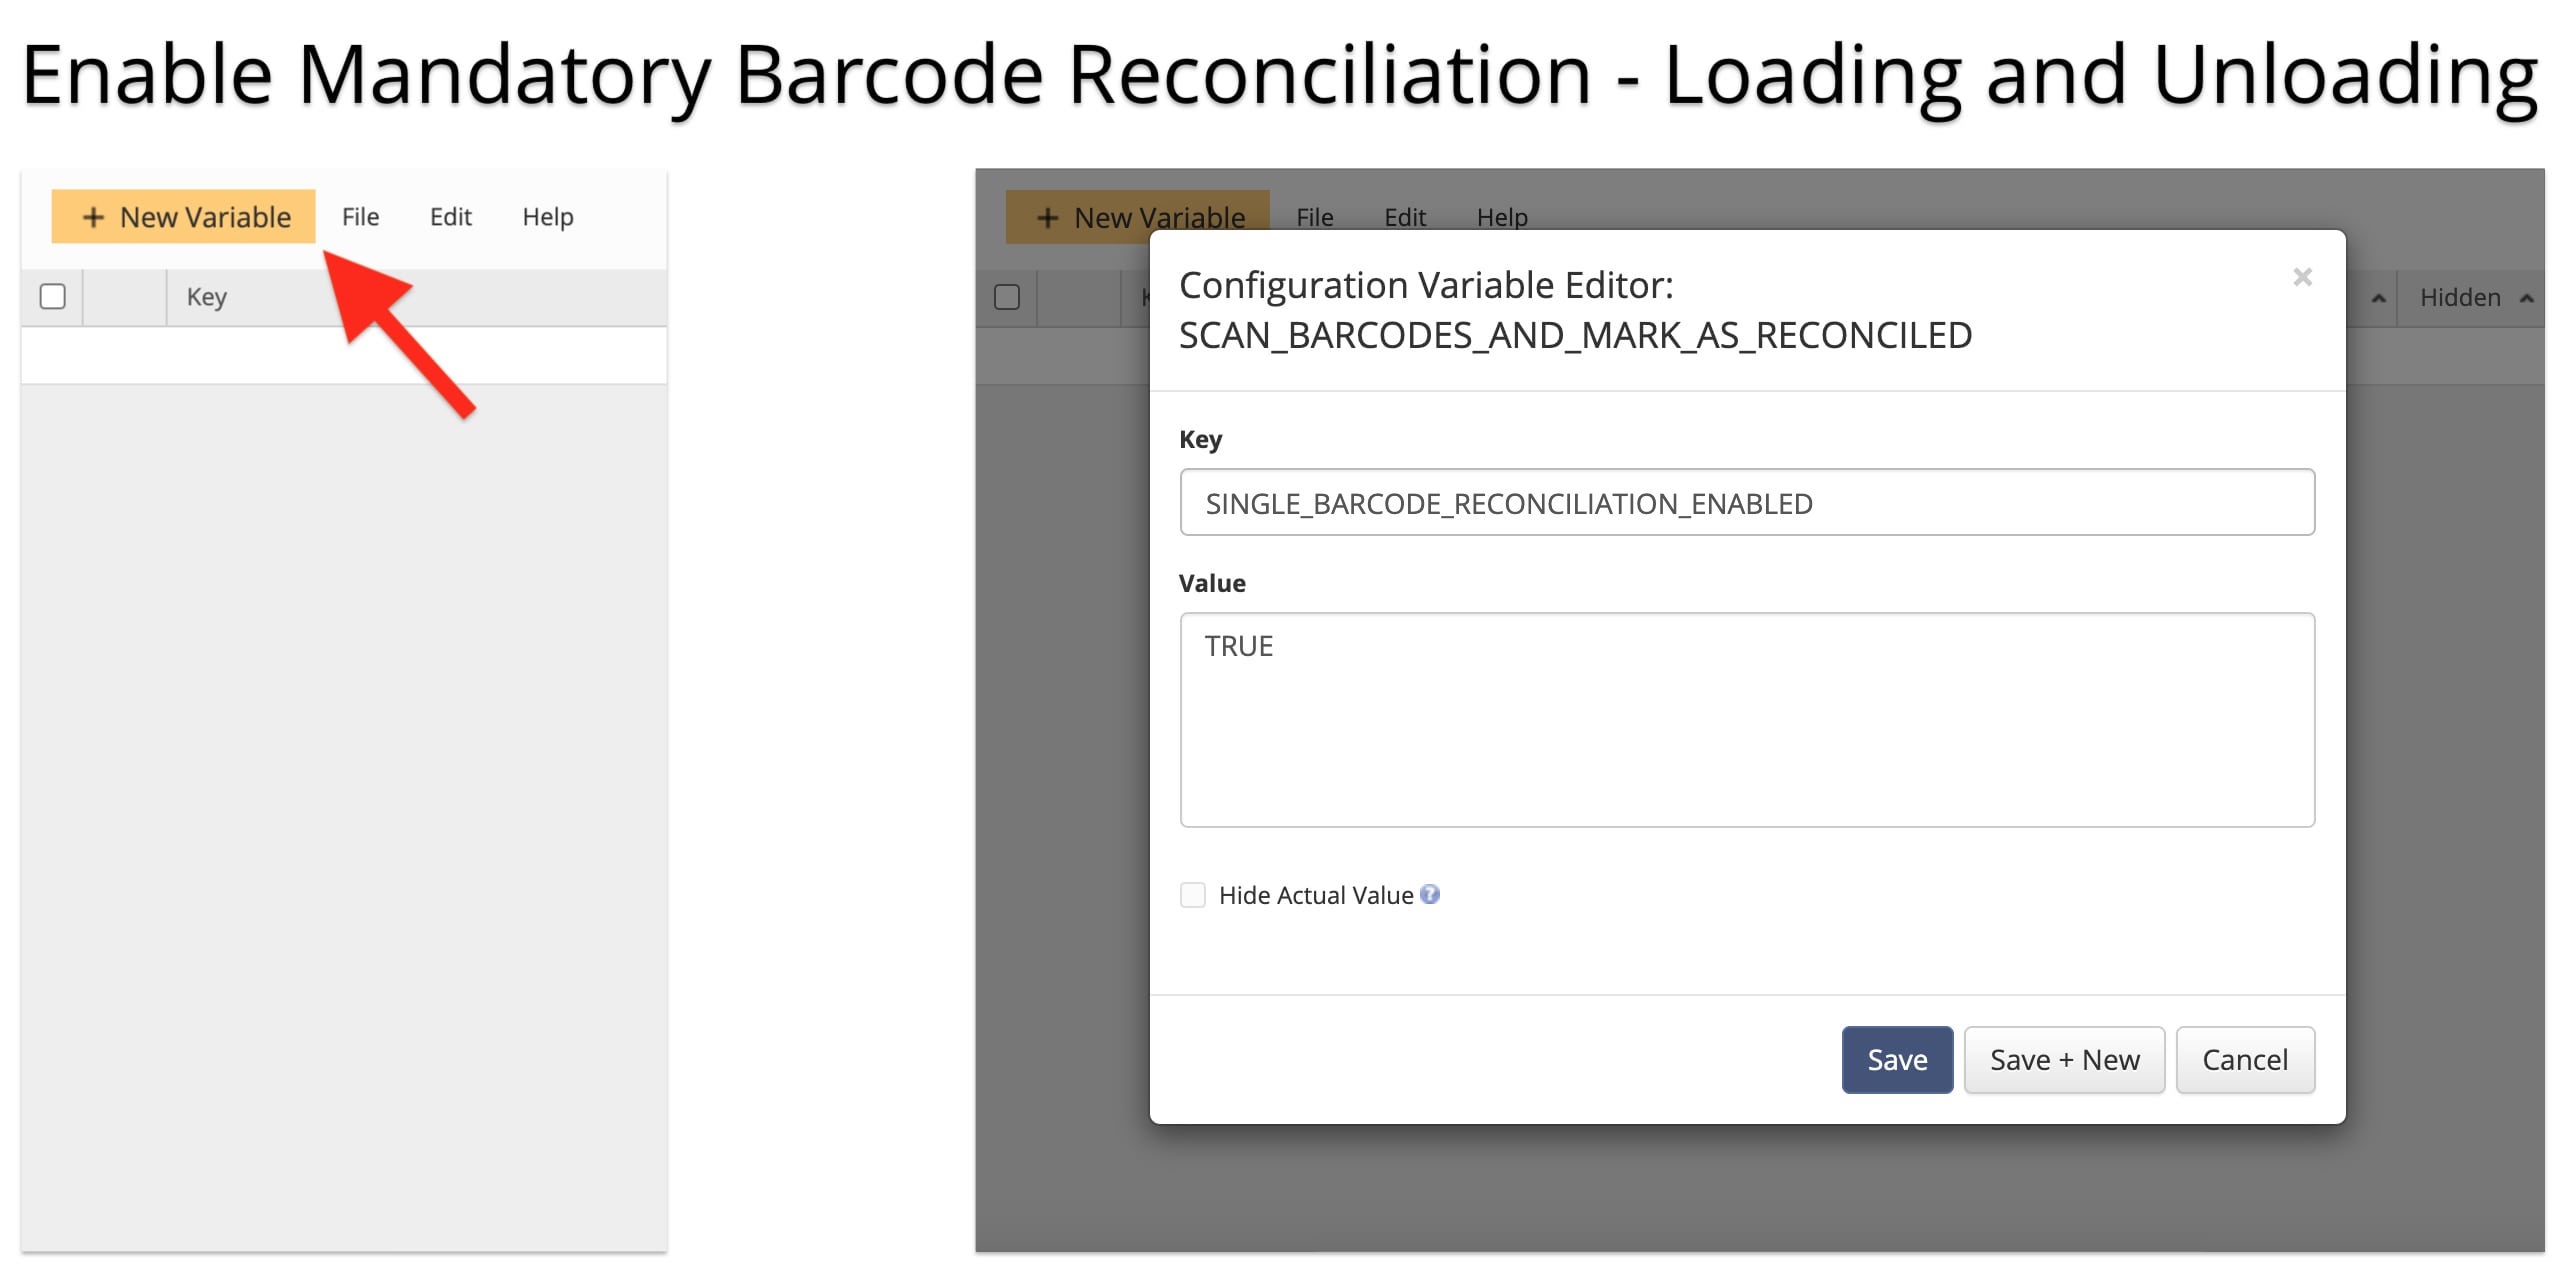 Enable mandatory barcode reconciliation for loading and unloading on mobile route planner apps.